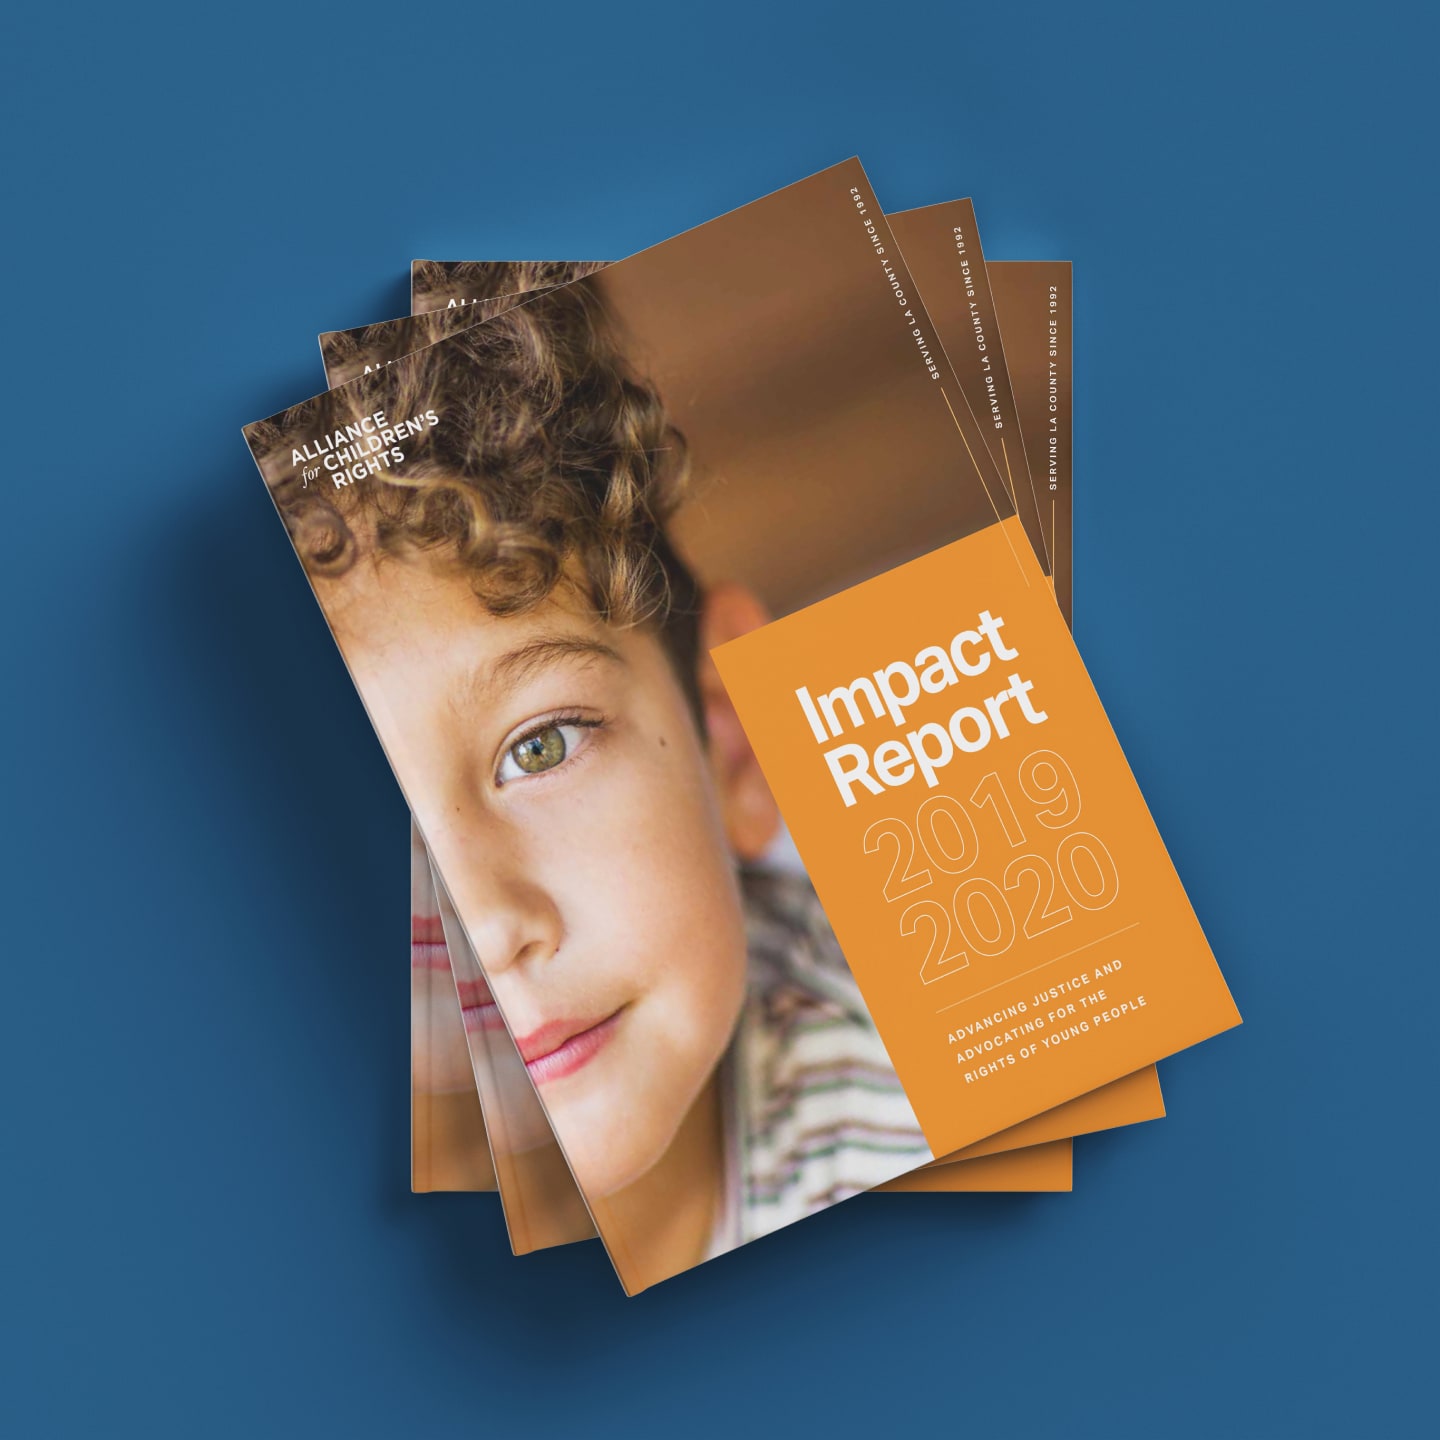 Brave Factor Alliance for Children's Rights Annual Report